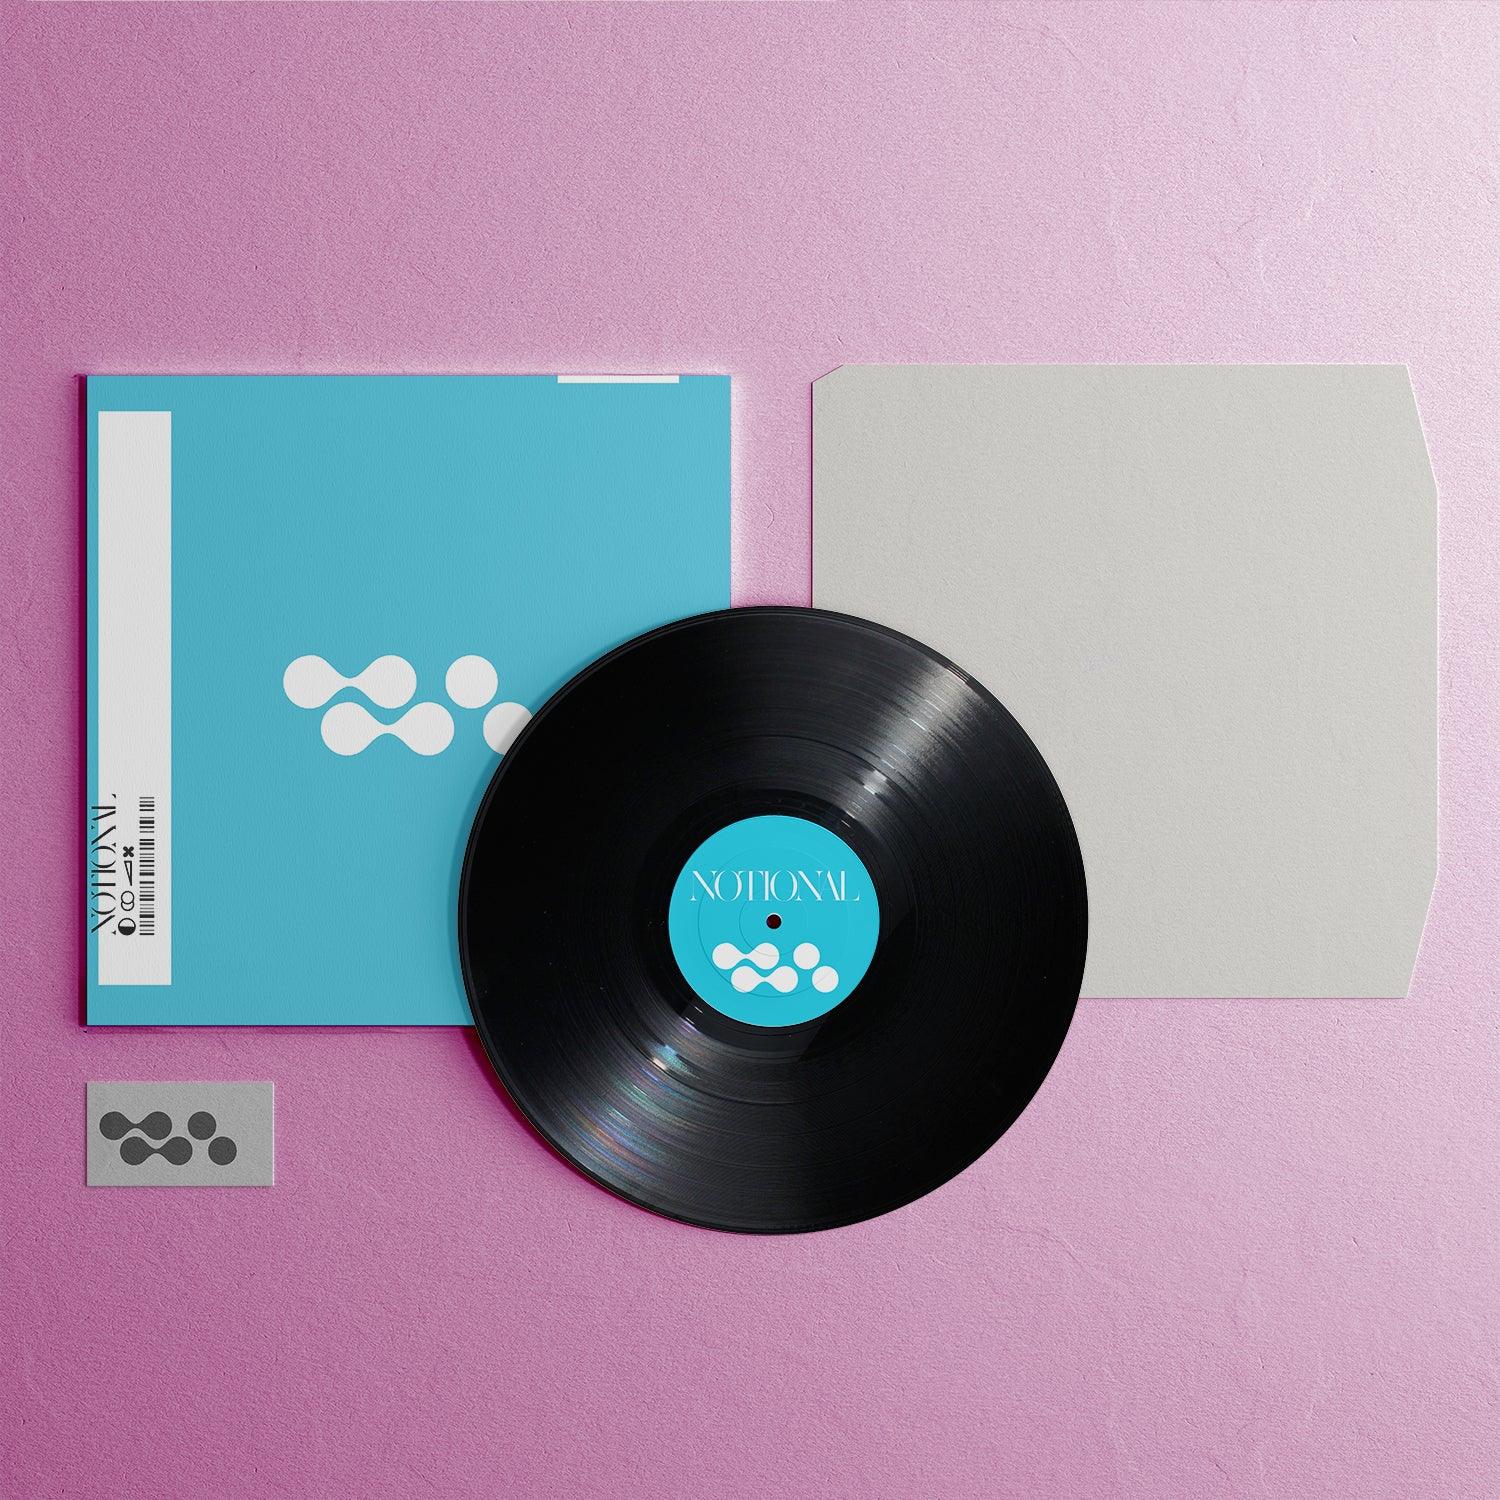 Fully Customizable 12" Vinyl Mockup with Download Card for a Professional Look. Birds Eye View.